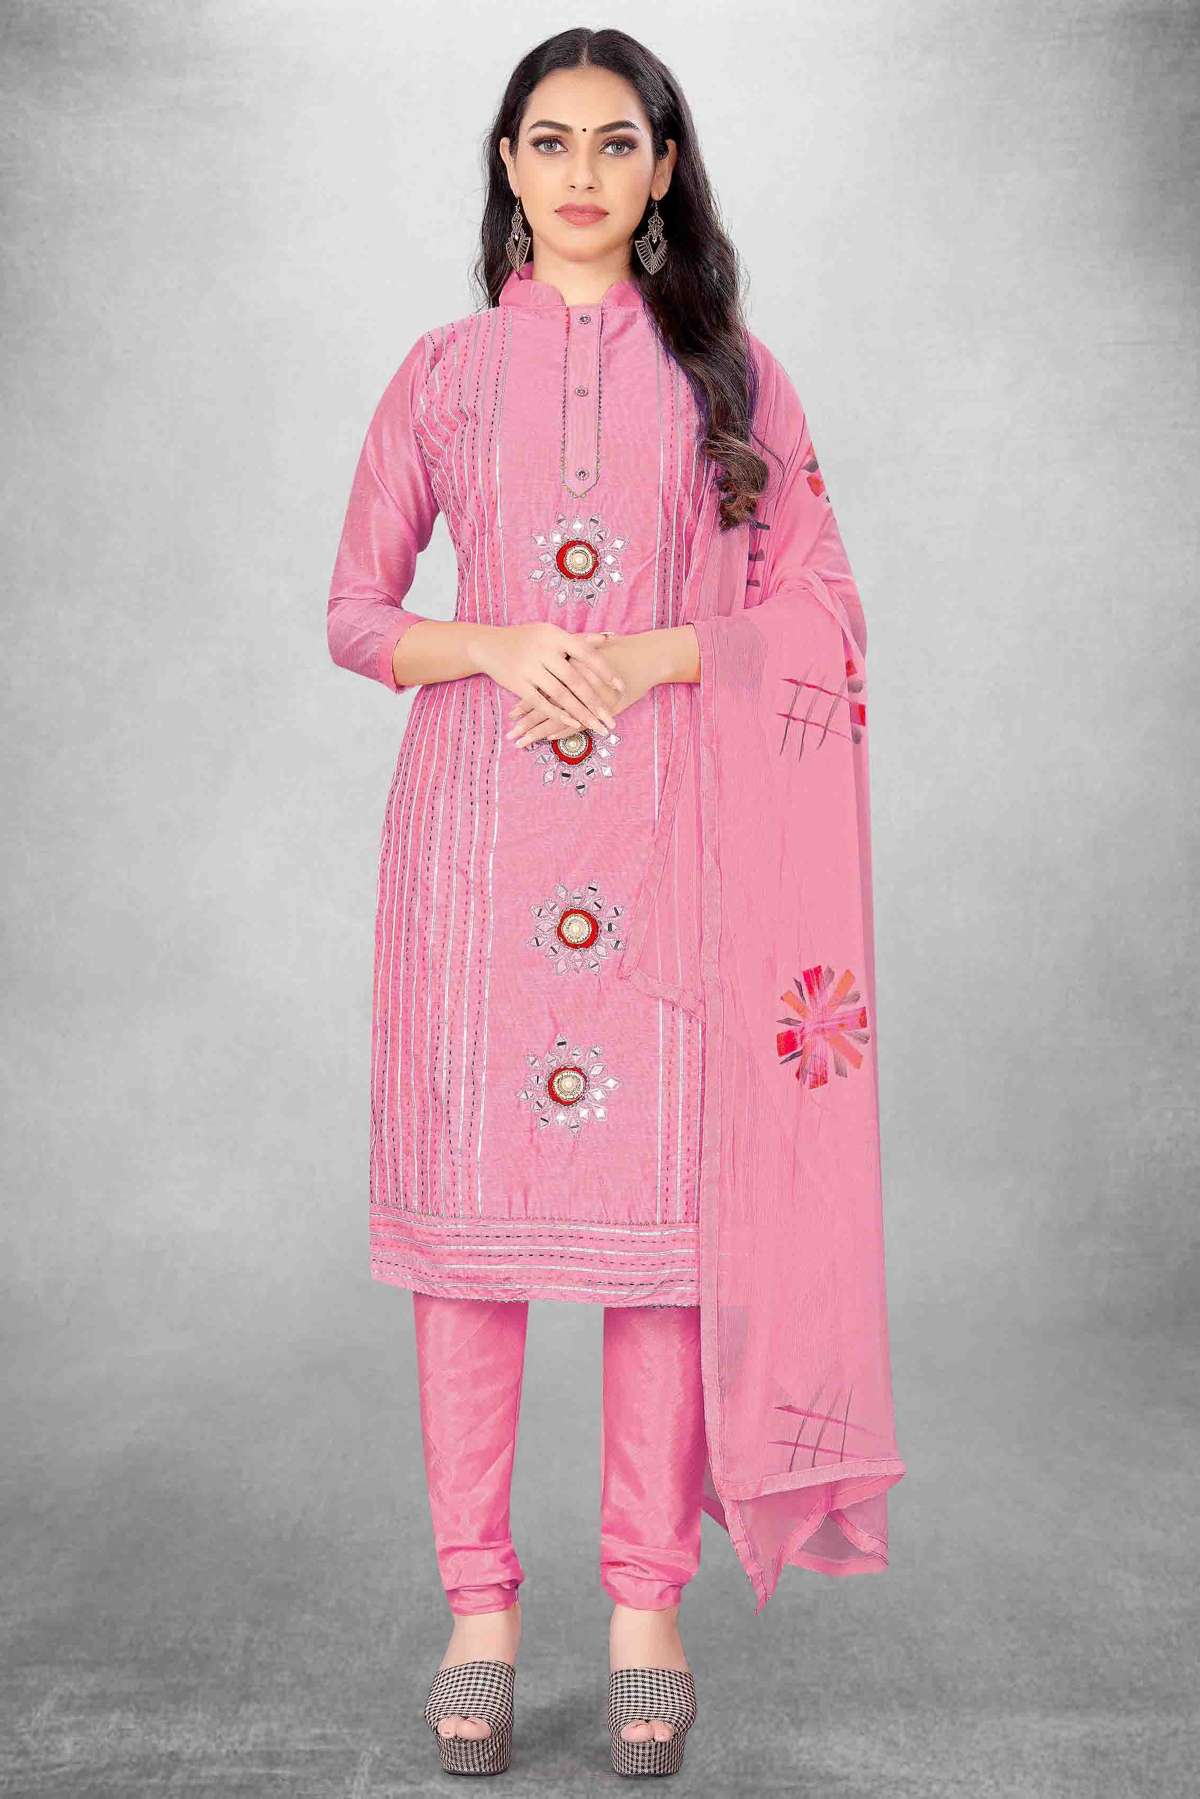 Unstitched Modal Cotton Embroidery Churidar Suit In Pink Colour - US3234464